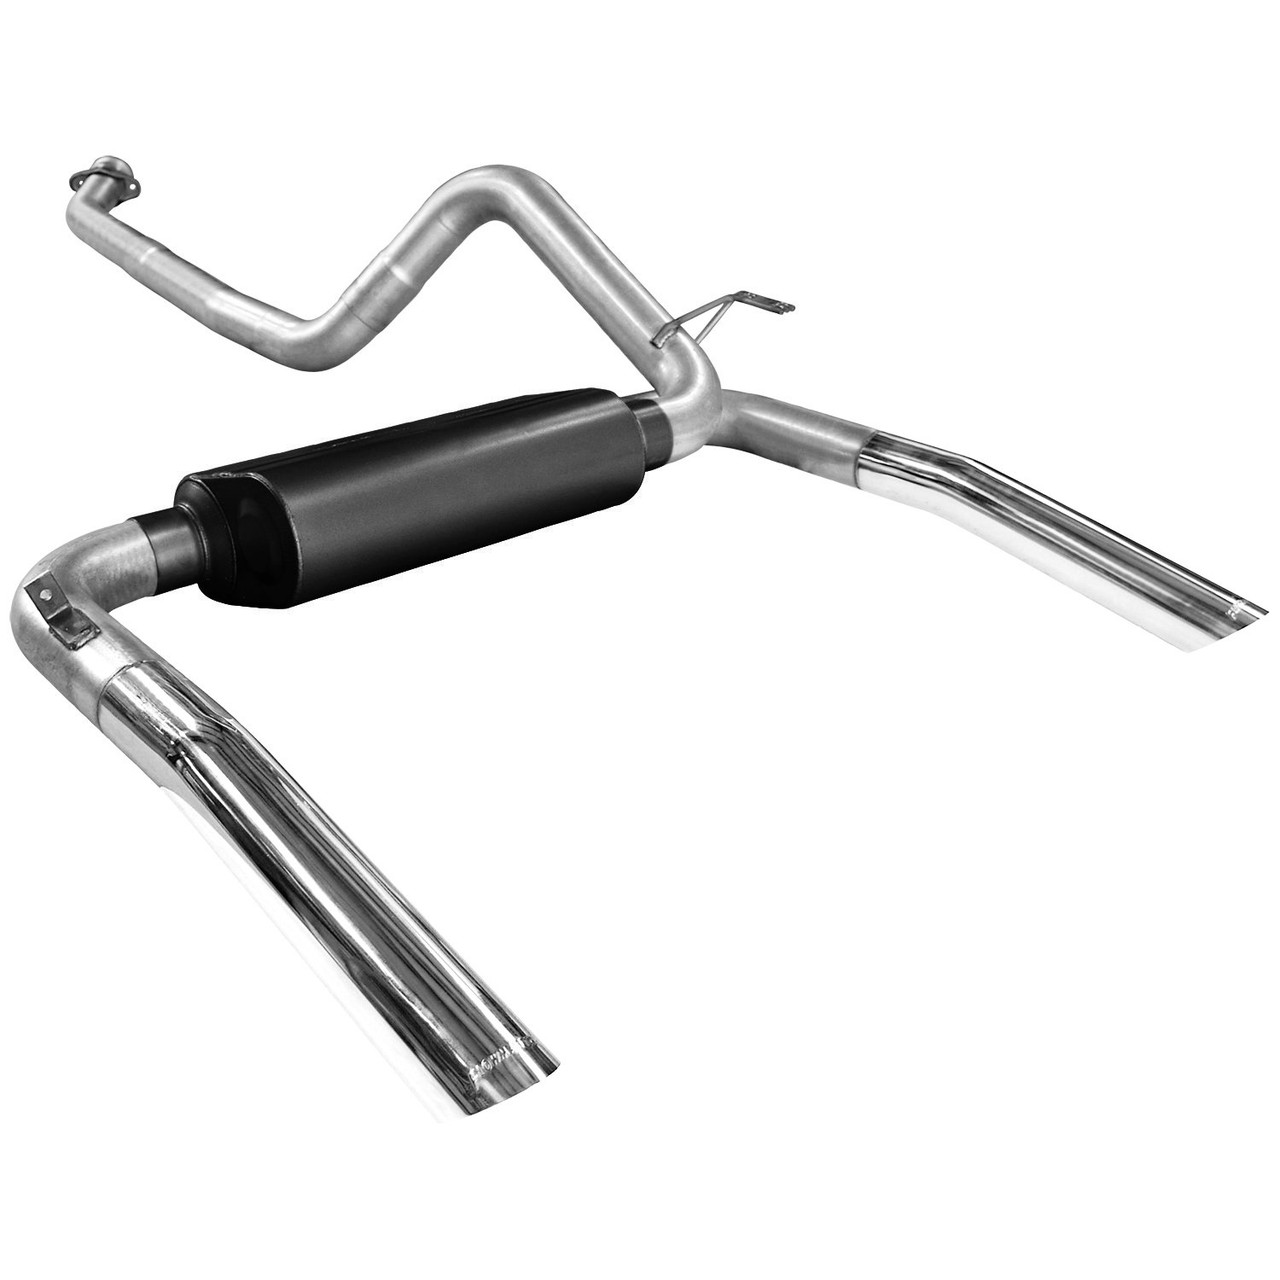 1985 Camaro Exhaust System Review